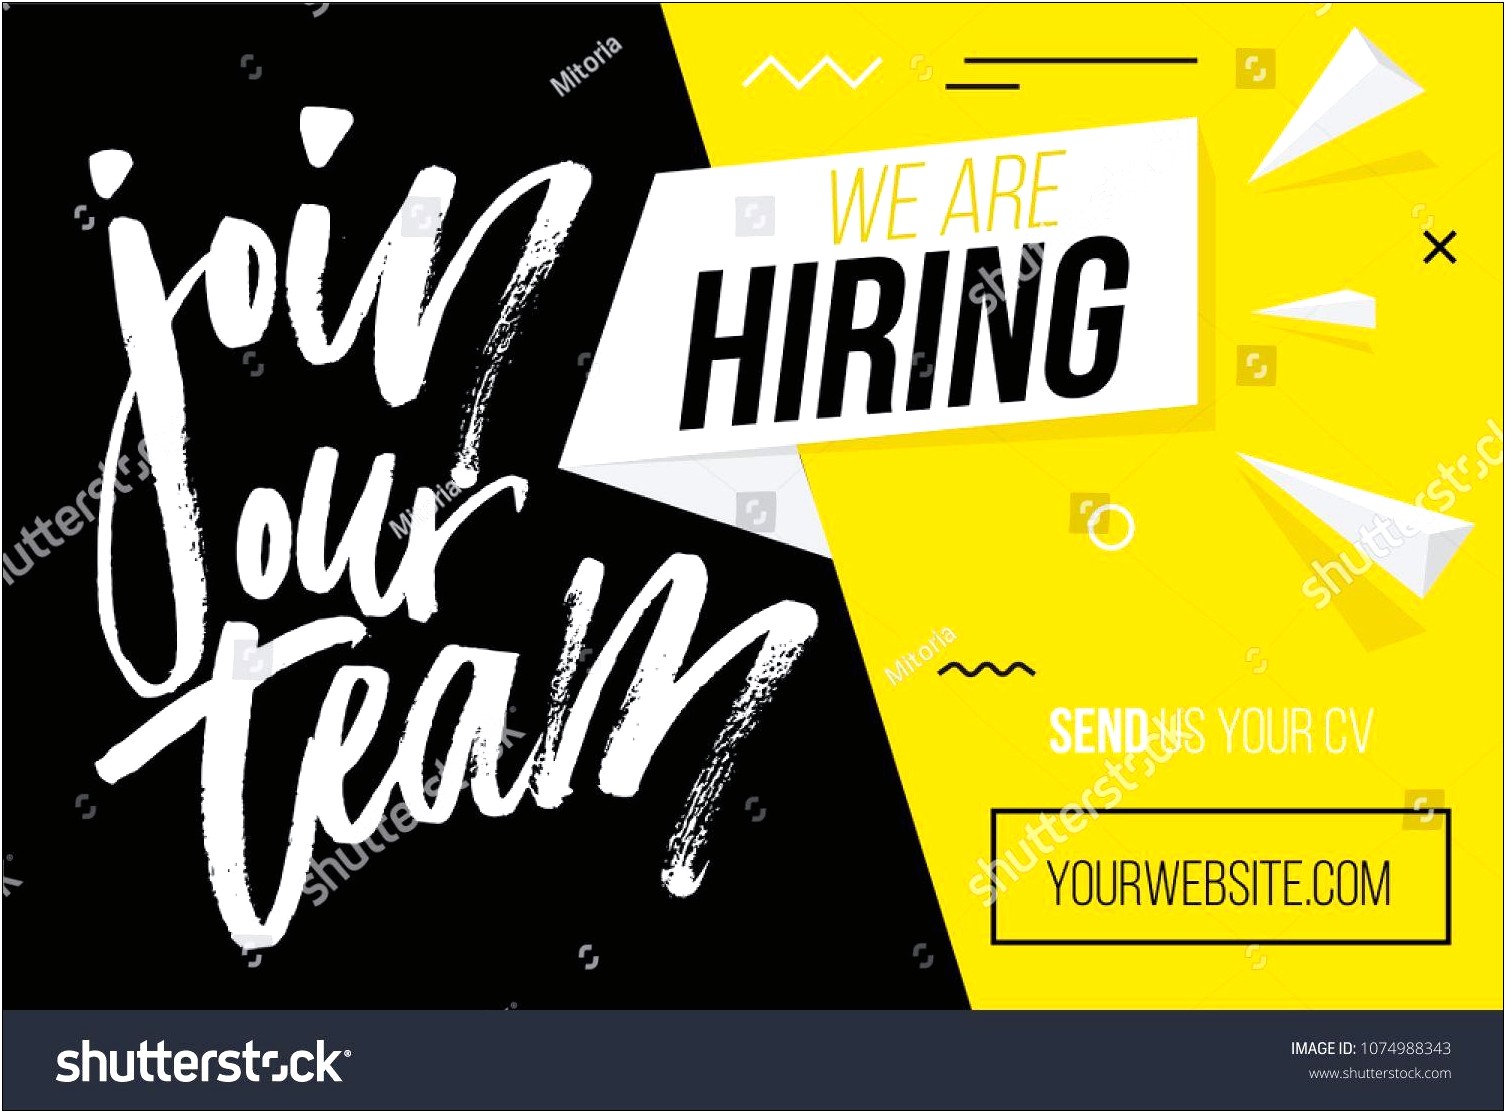 We Are Hiring Poster Template Free